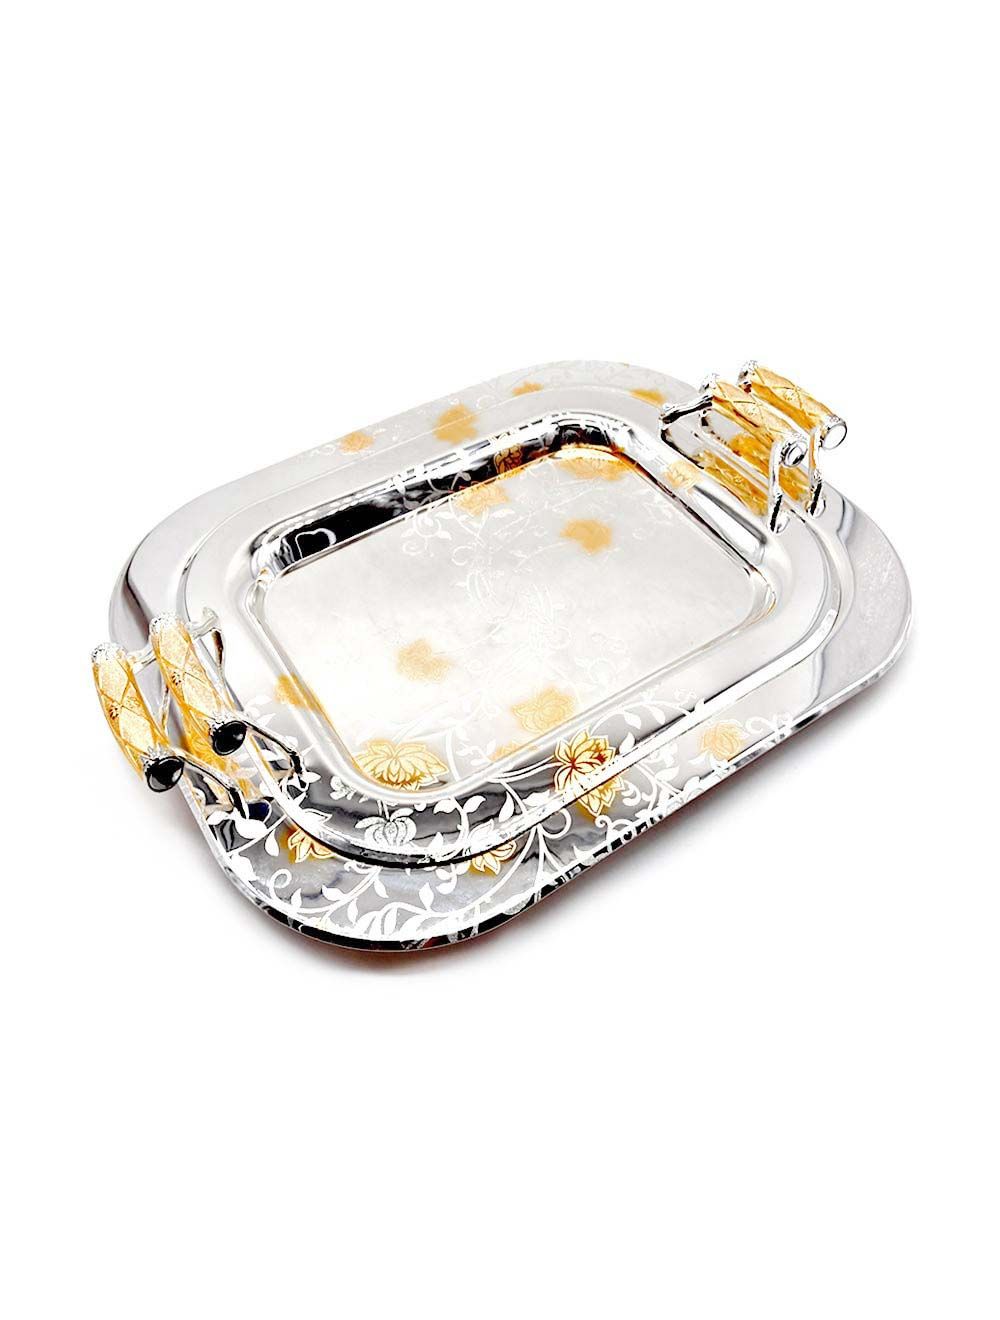 Set of 2 Tray Silver-Gold Plated Design 